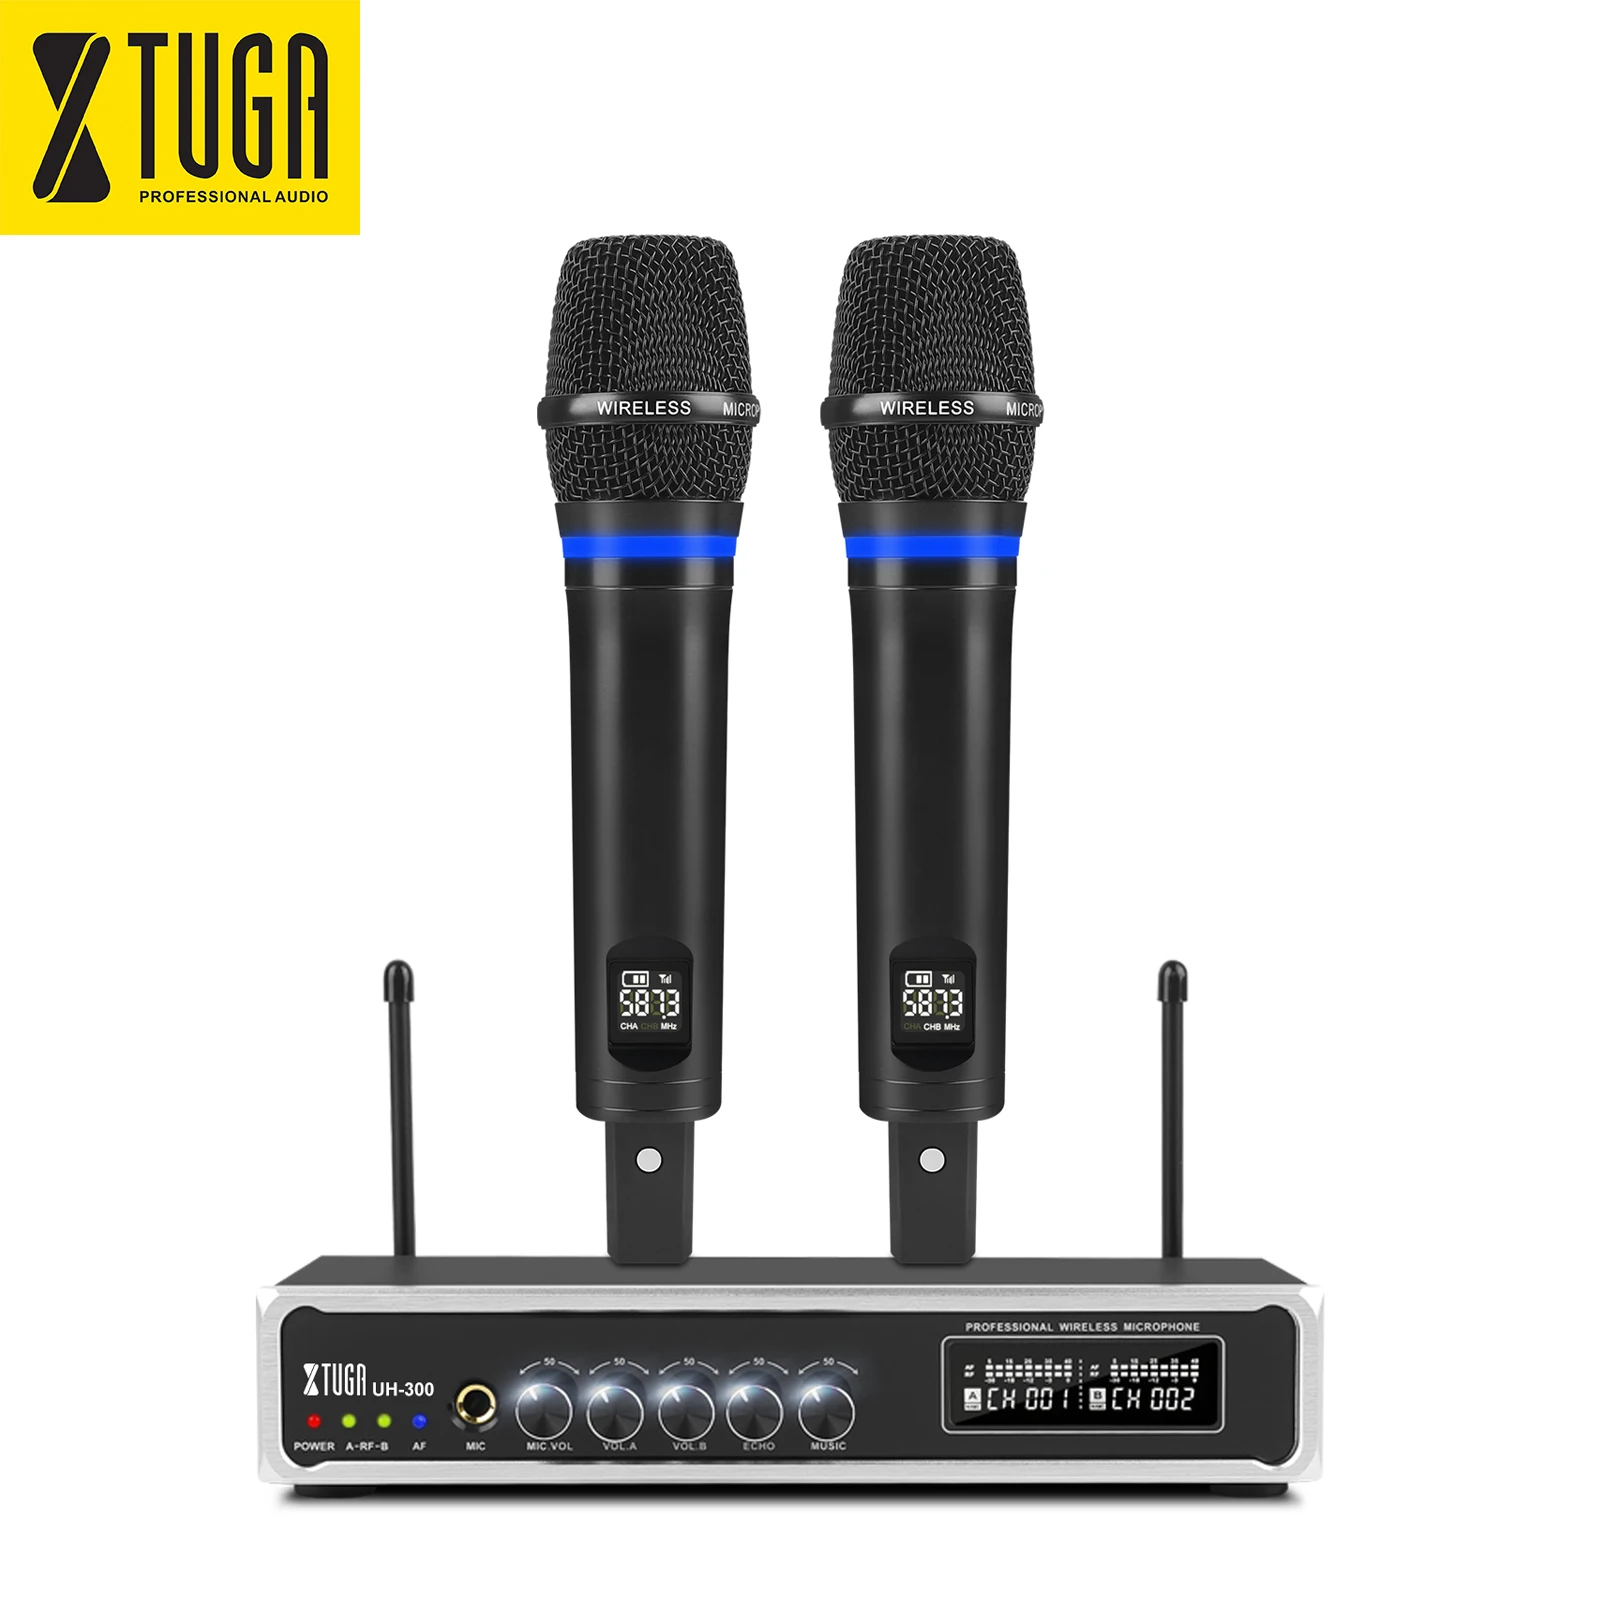 

sell best quality professional 2 channel mic wireless dynamic uhf cardioid mike device USB teaching microphone system, Black